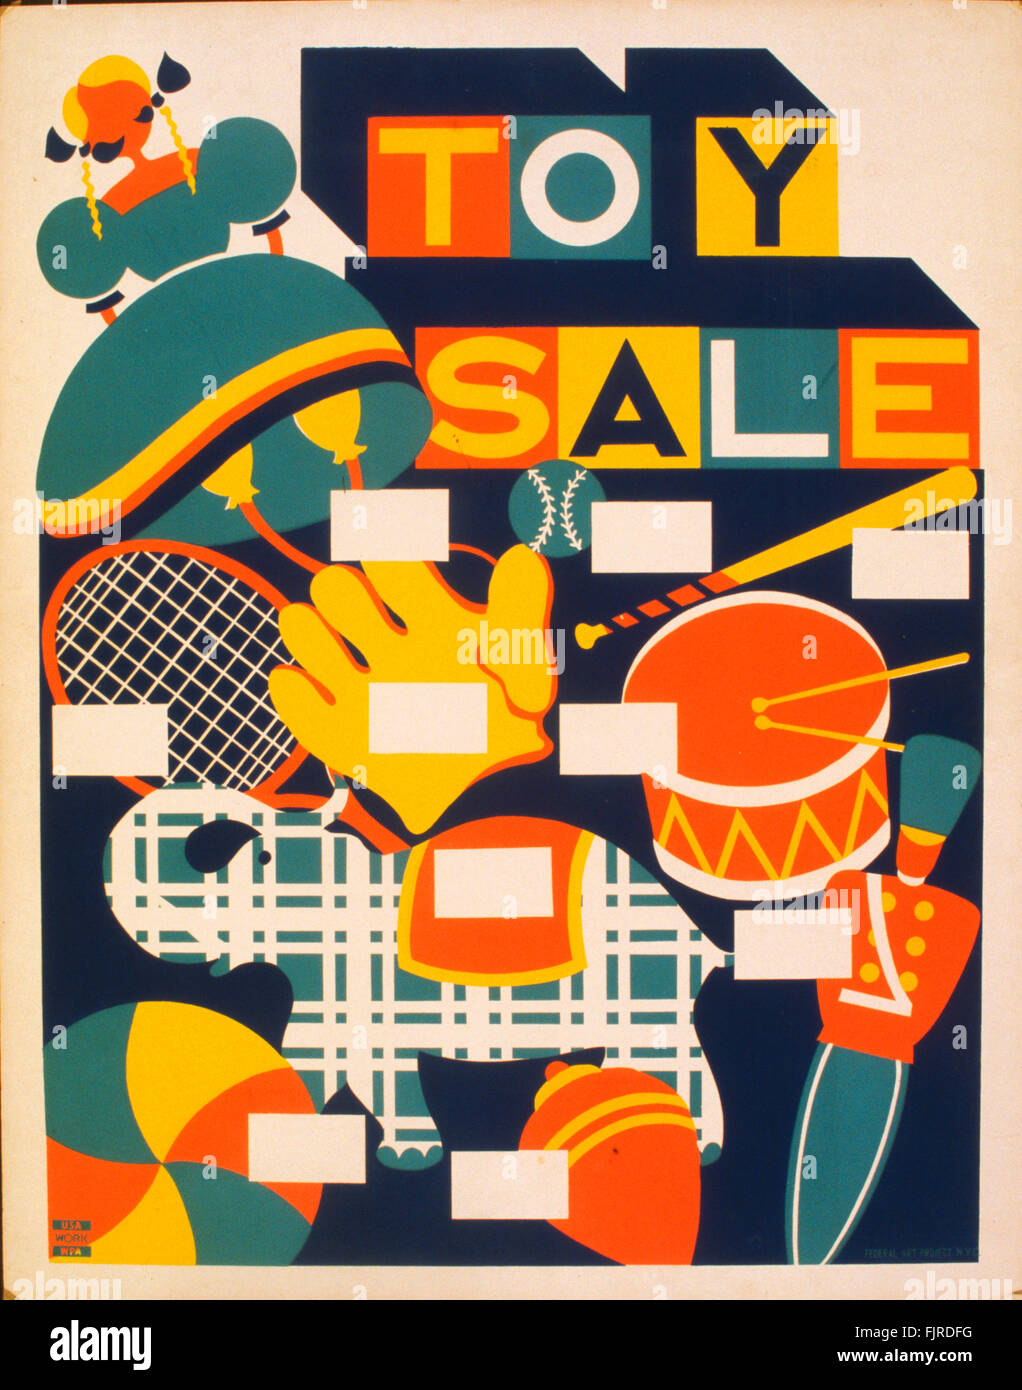 Toy sale poster created by the WPA, 1941-1943. Library of Congress. (Richard B. Levine) Stock Photo